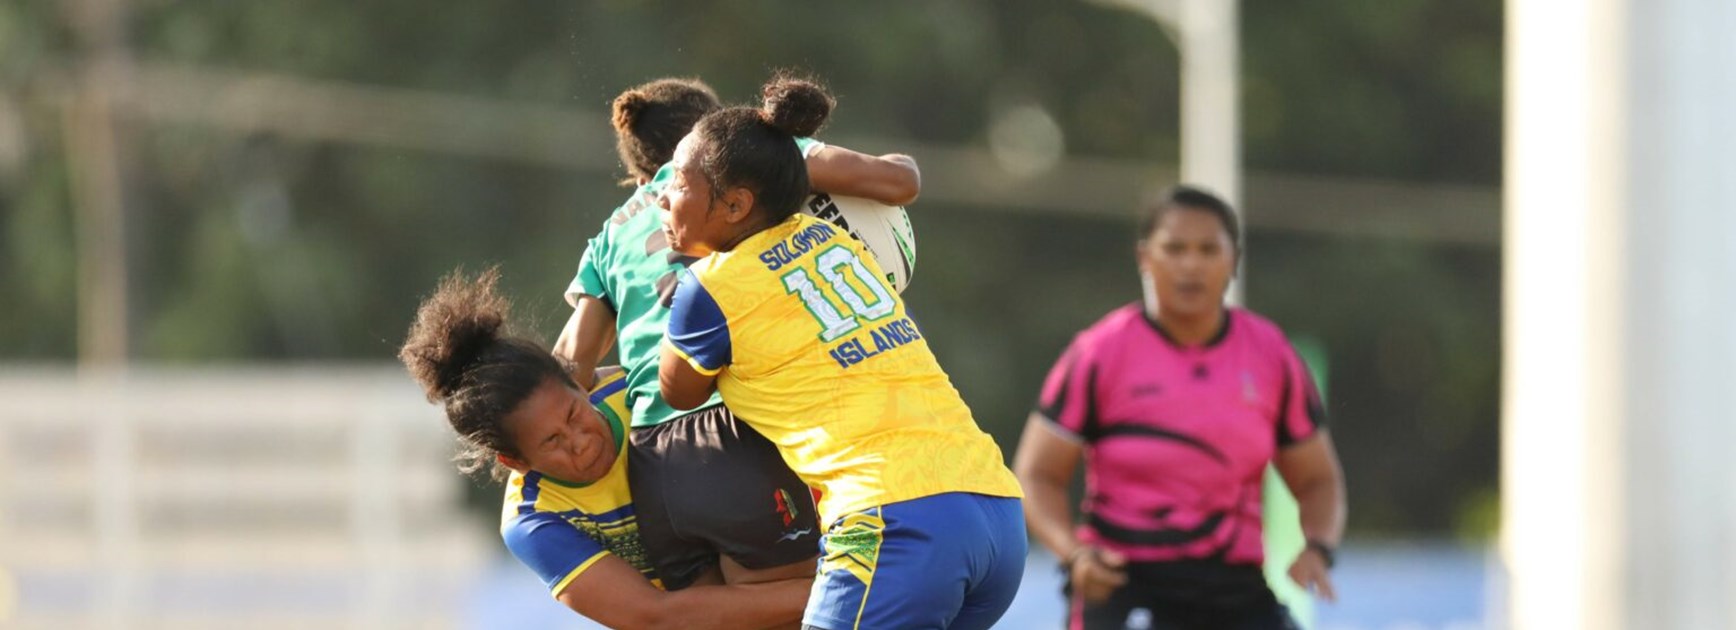 Fiji’s Sainimere Vateitei and Cook Islands’ Patricia Taea became the first Pacific women to referee at an international rugby league tournament at Sol2023.